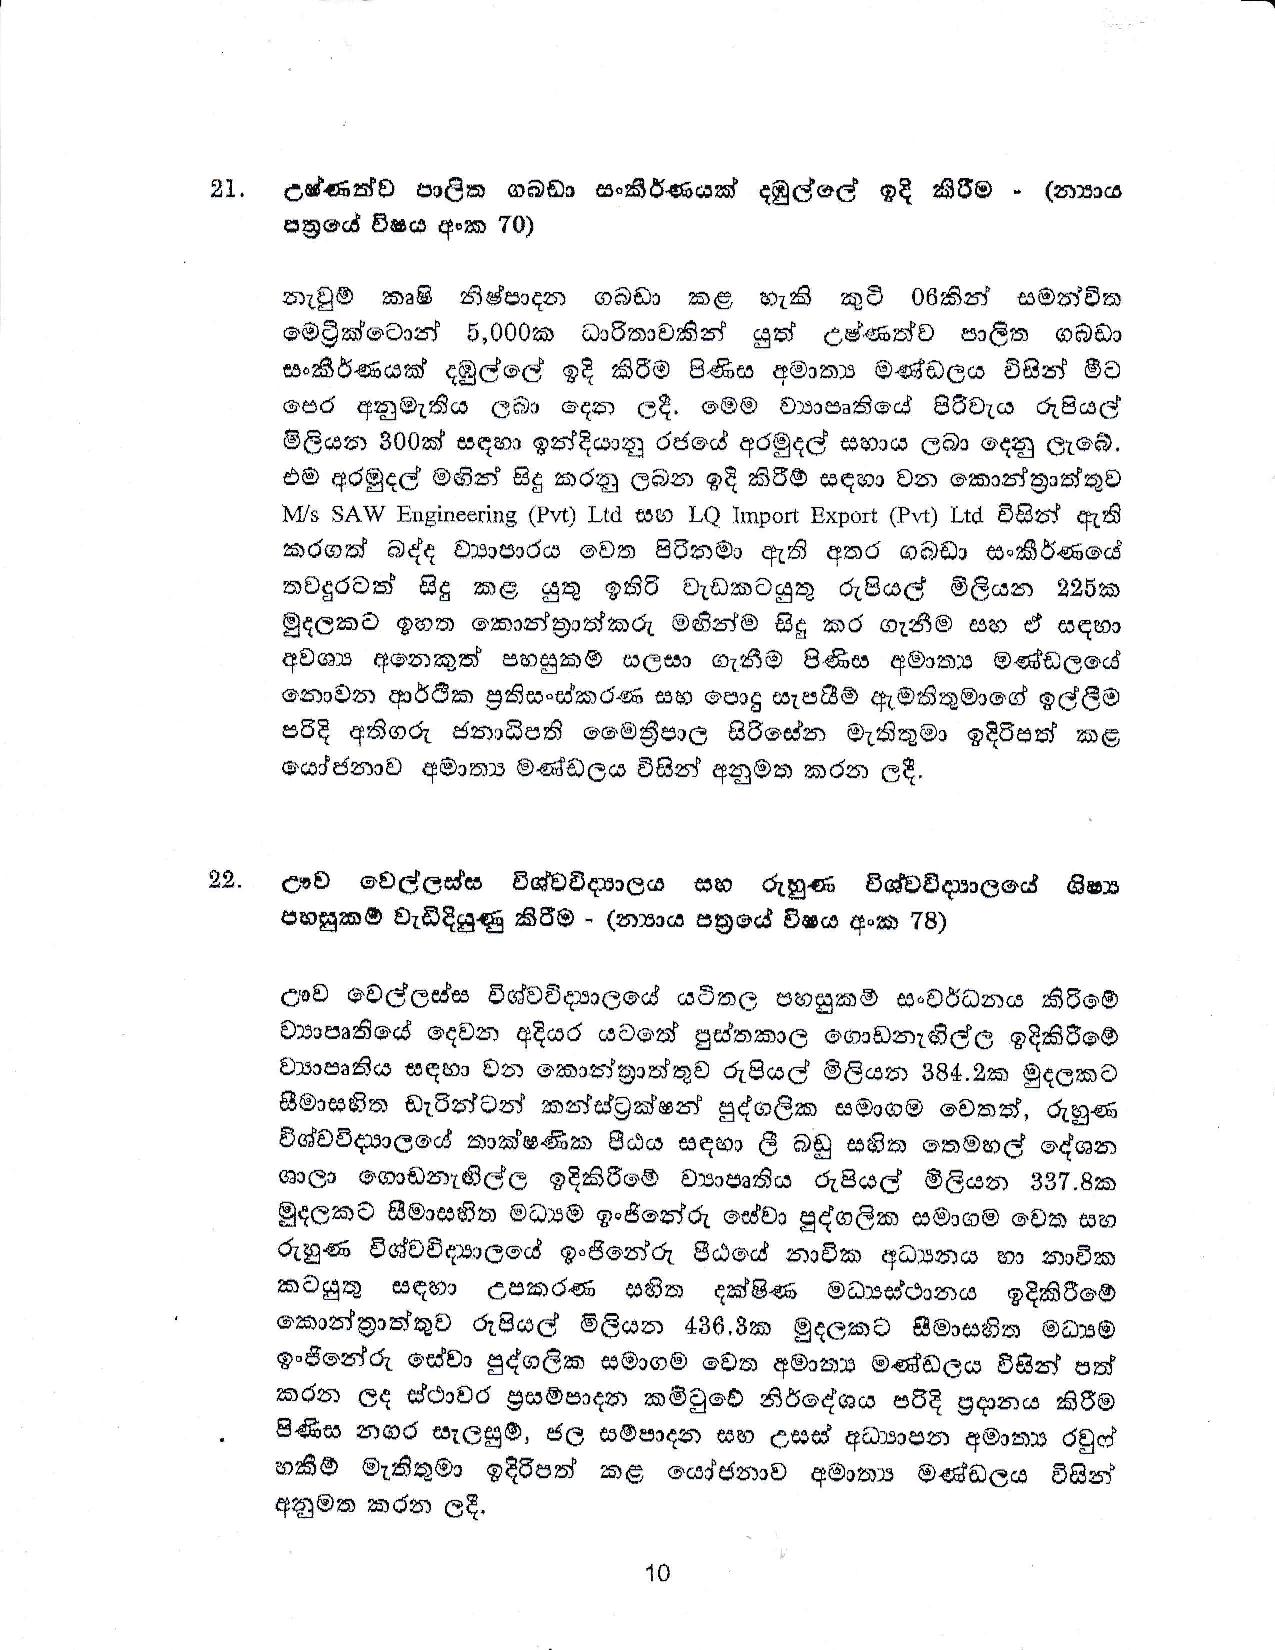 Cabinet Decision on 30.04.2019 page 010